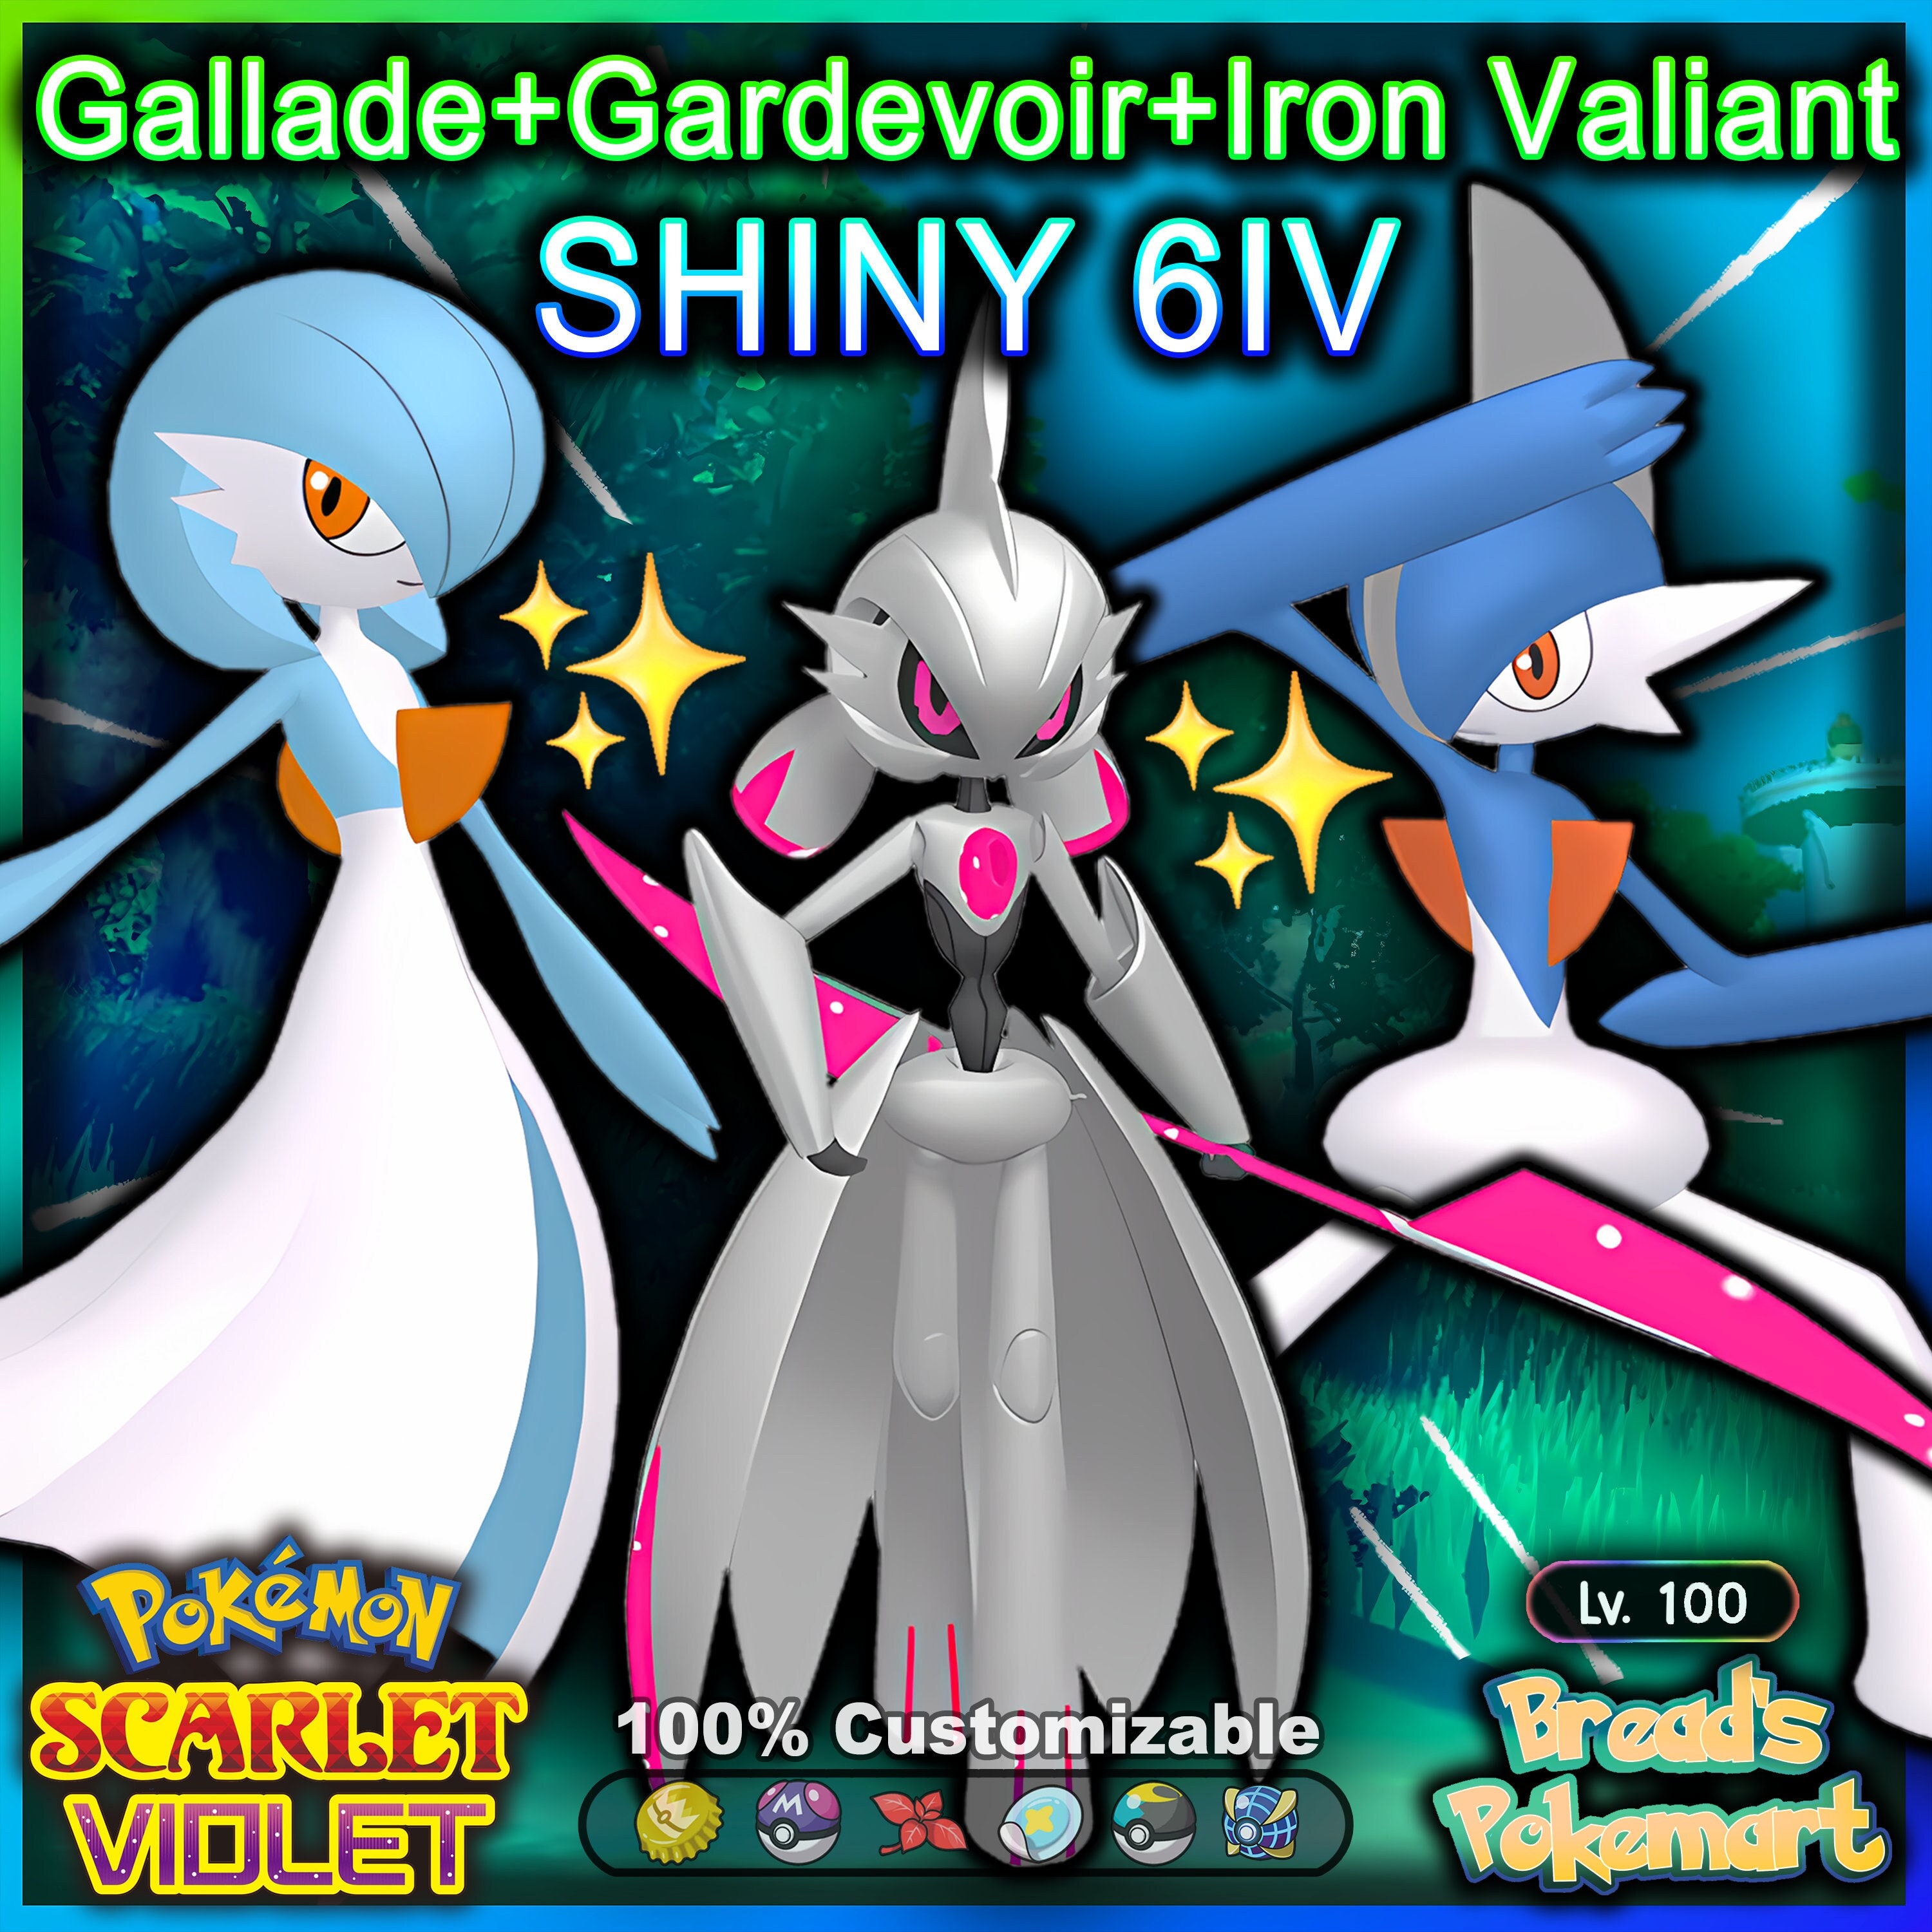 gardevoir, mega gardevoir, wally, and wally (pokemon and 1 more